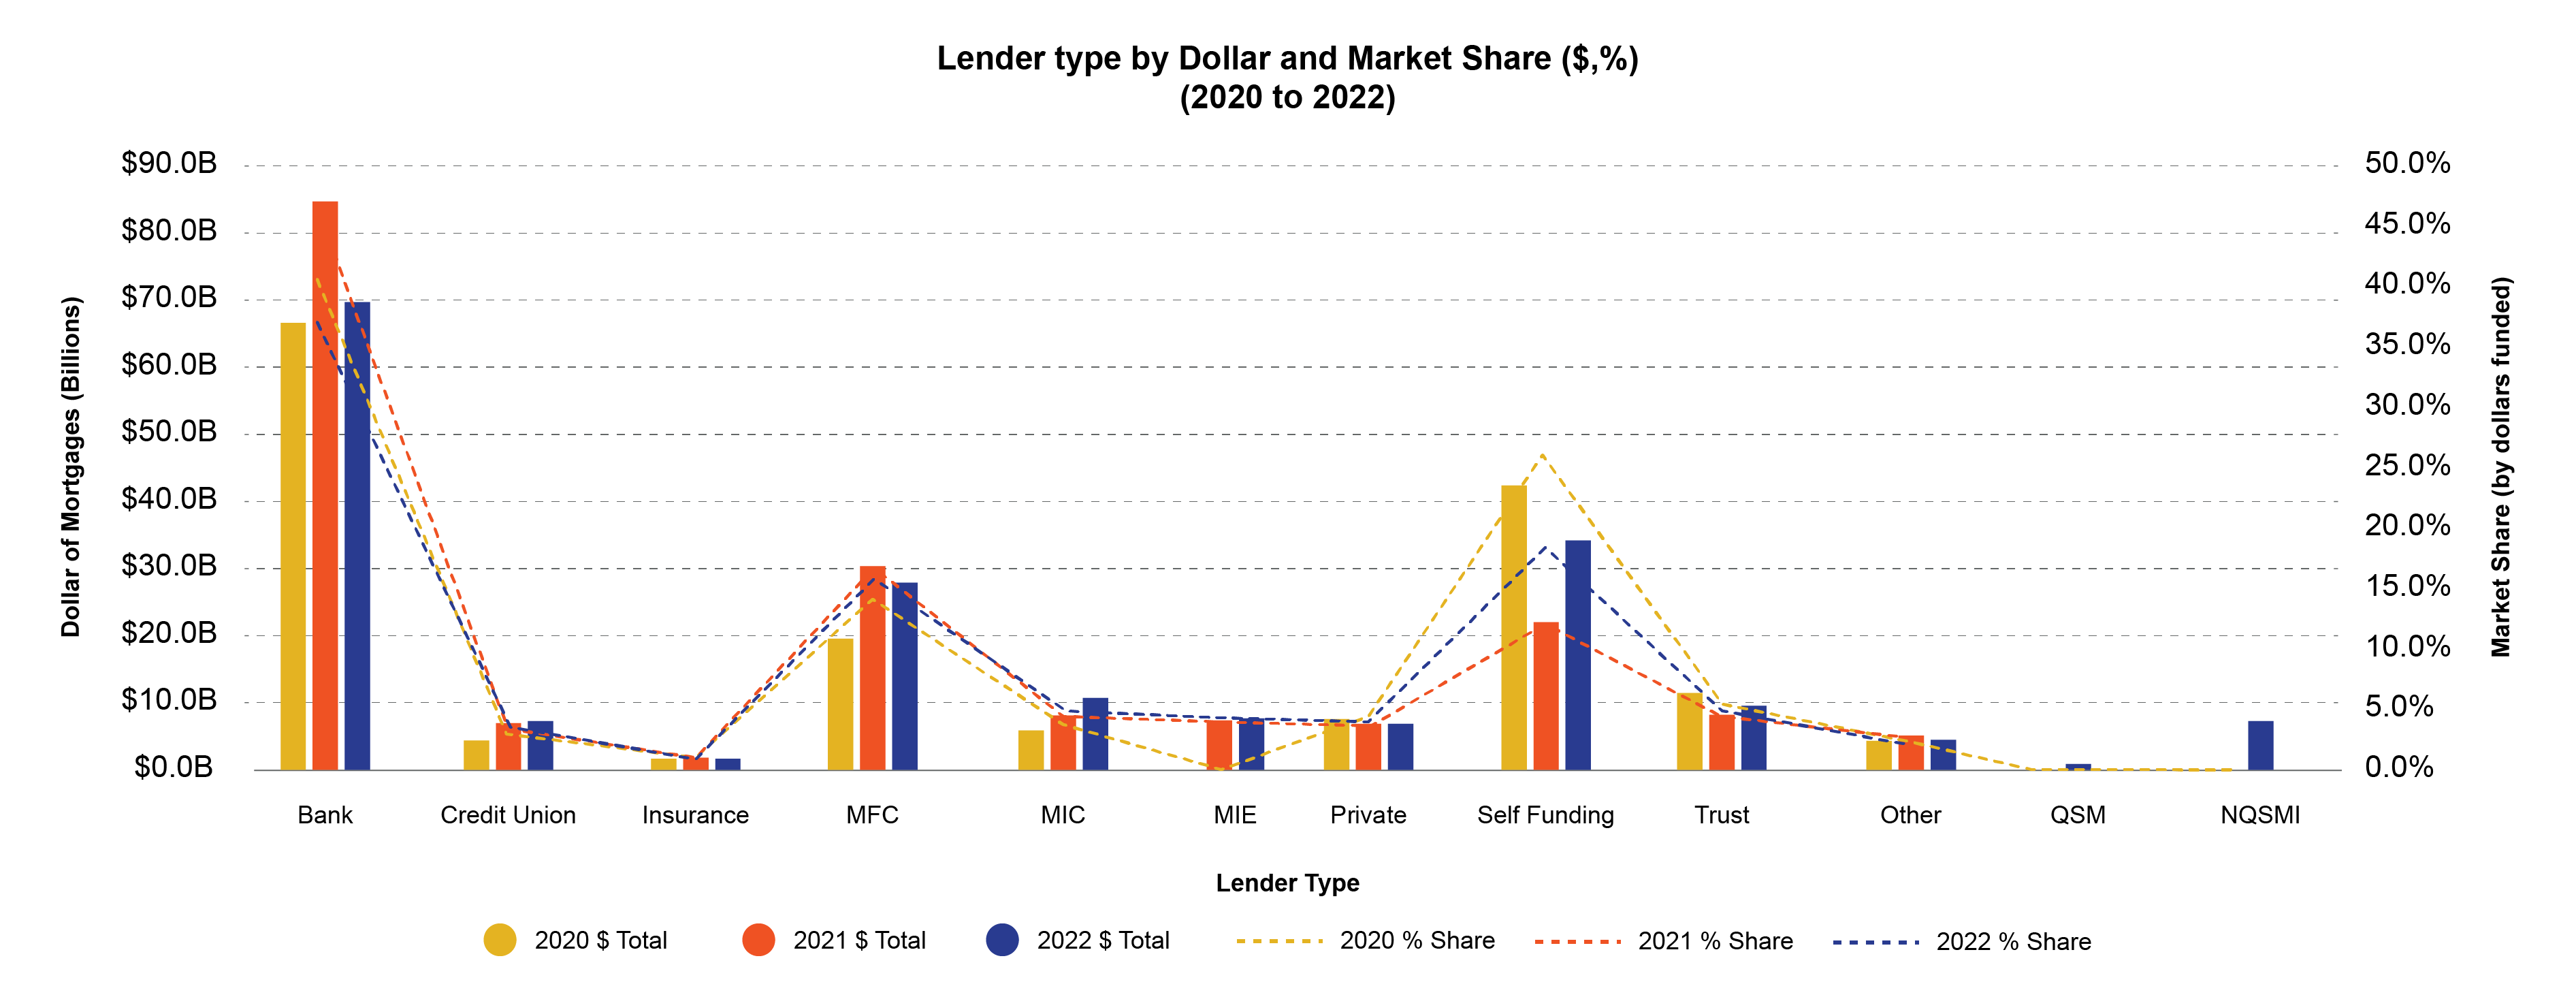 Lender Type by Dollar and Market Share (2020-2022)